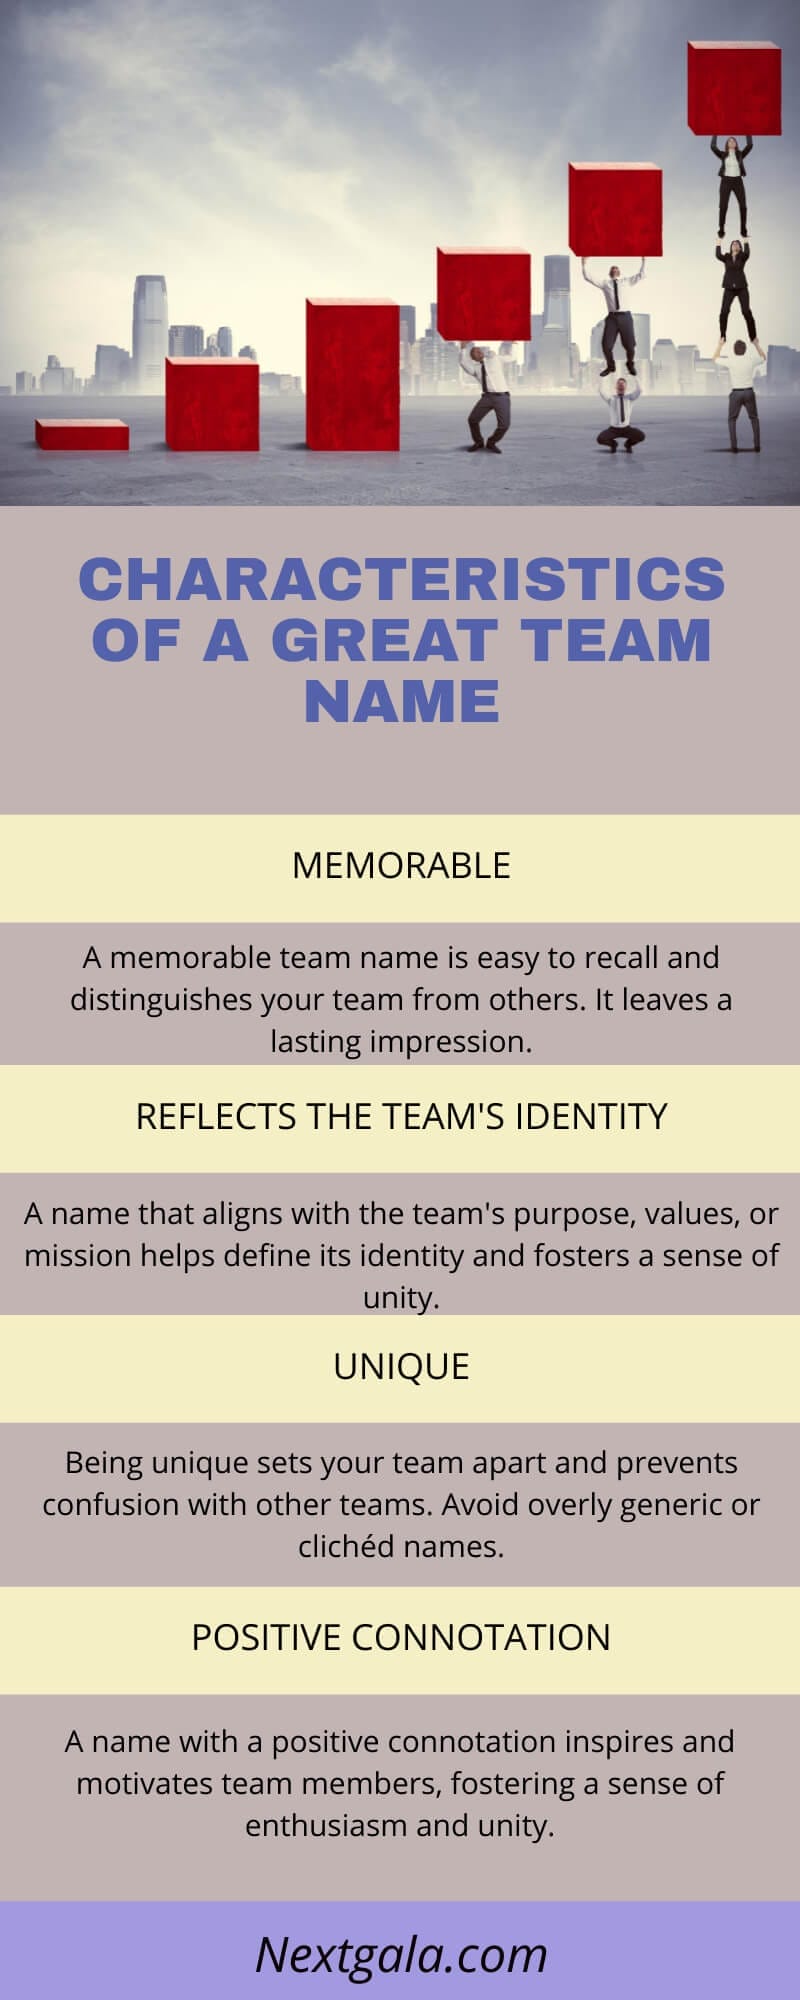 CHARACTERISTICS OF A GREAT TEAM NAME